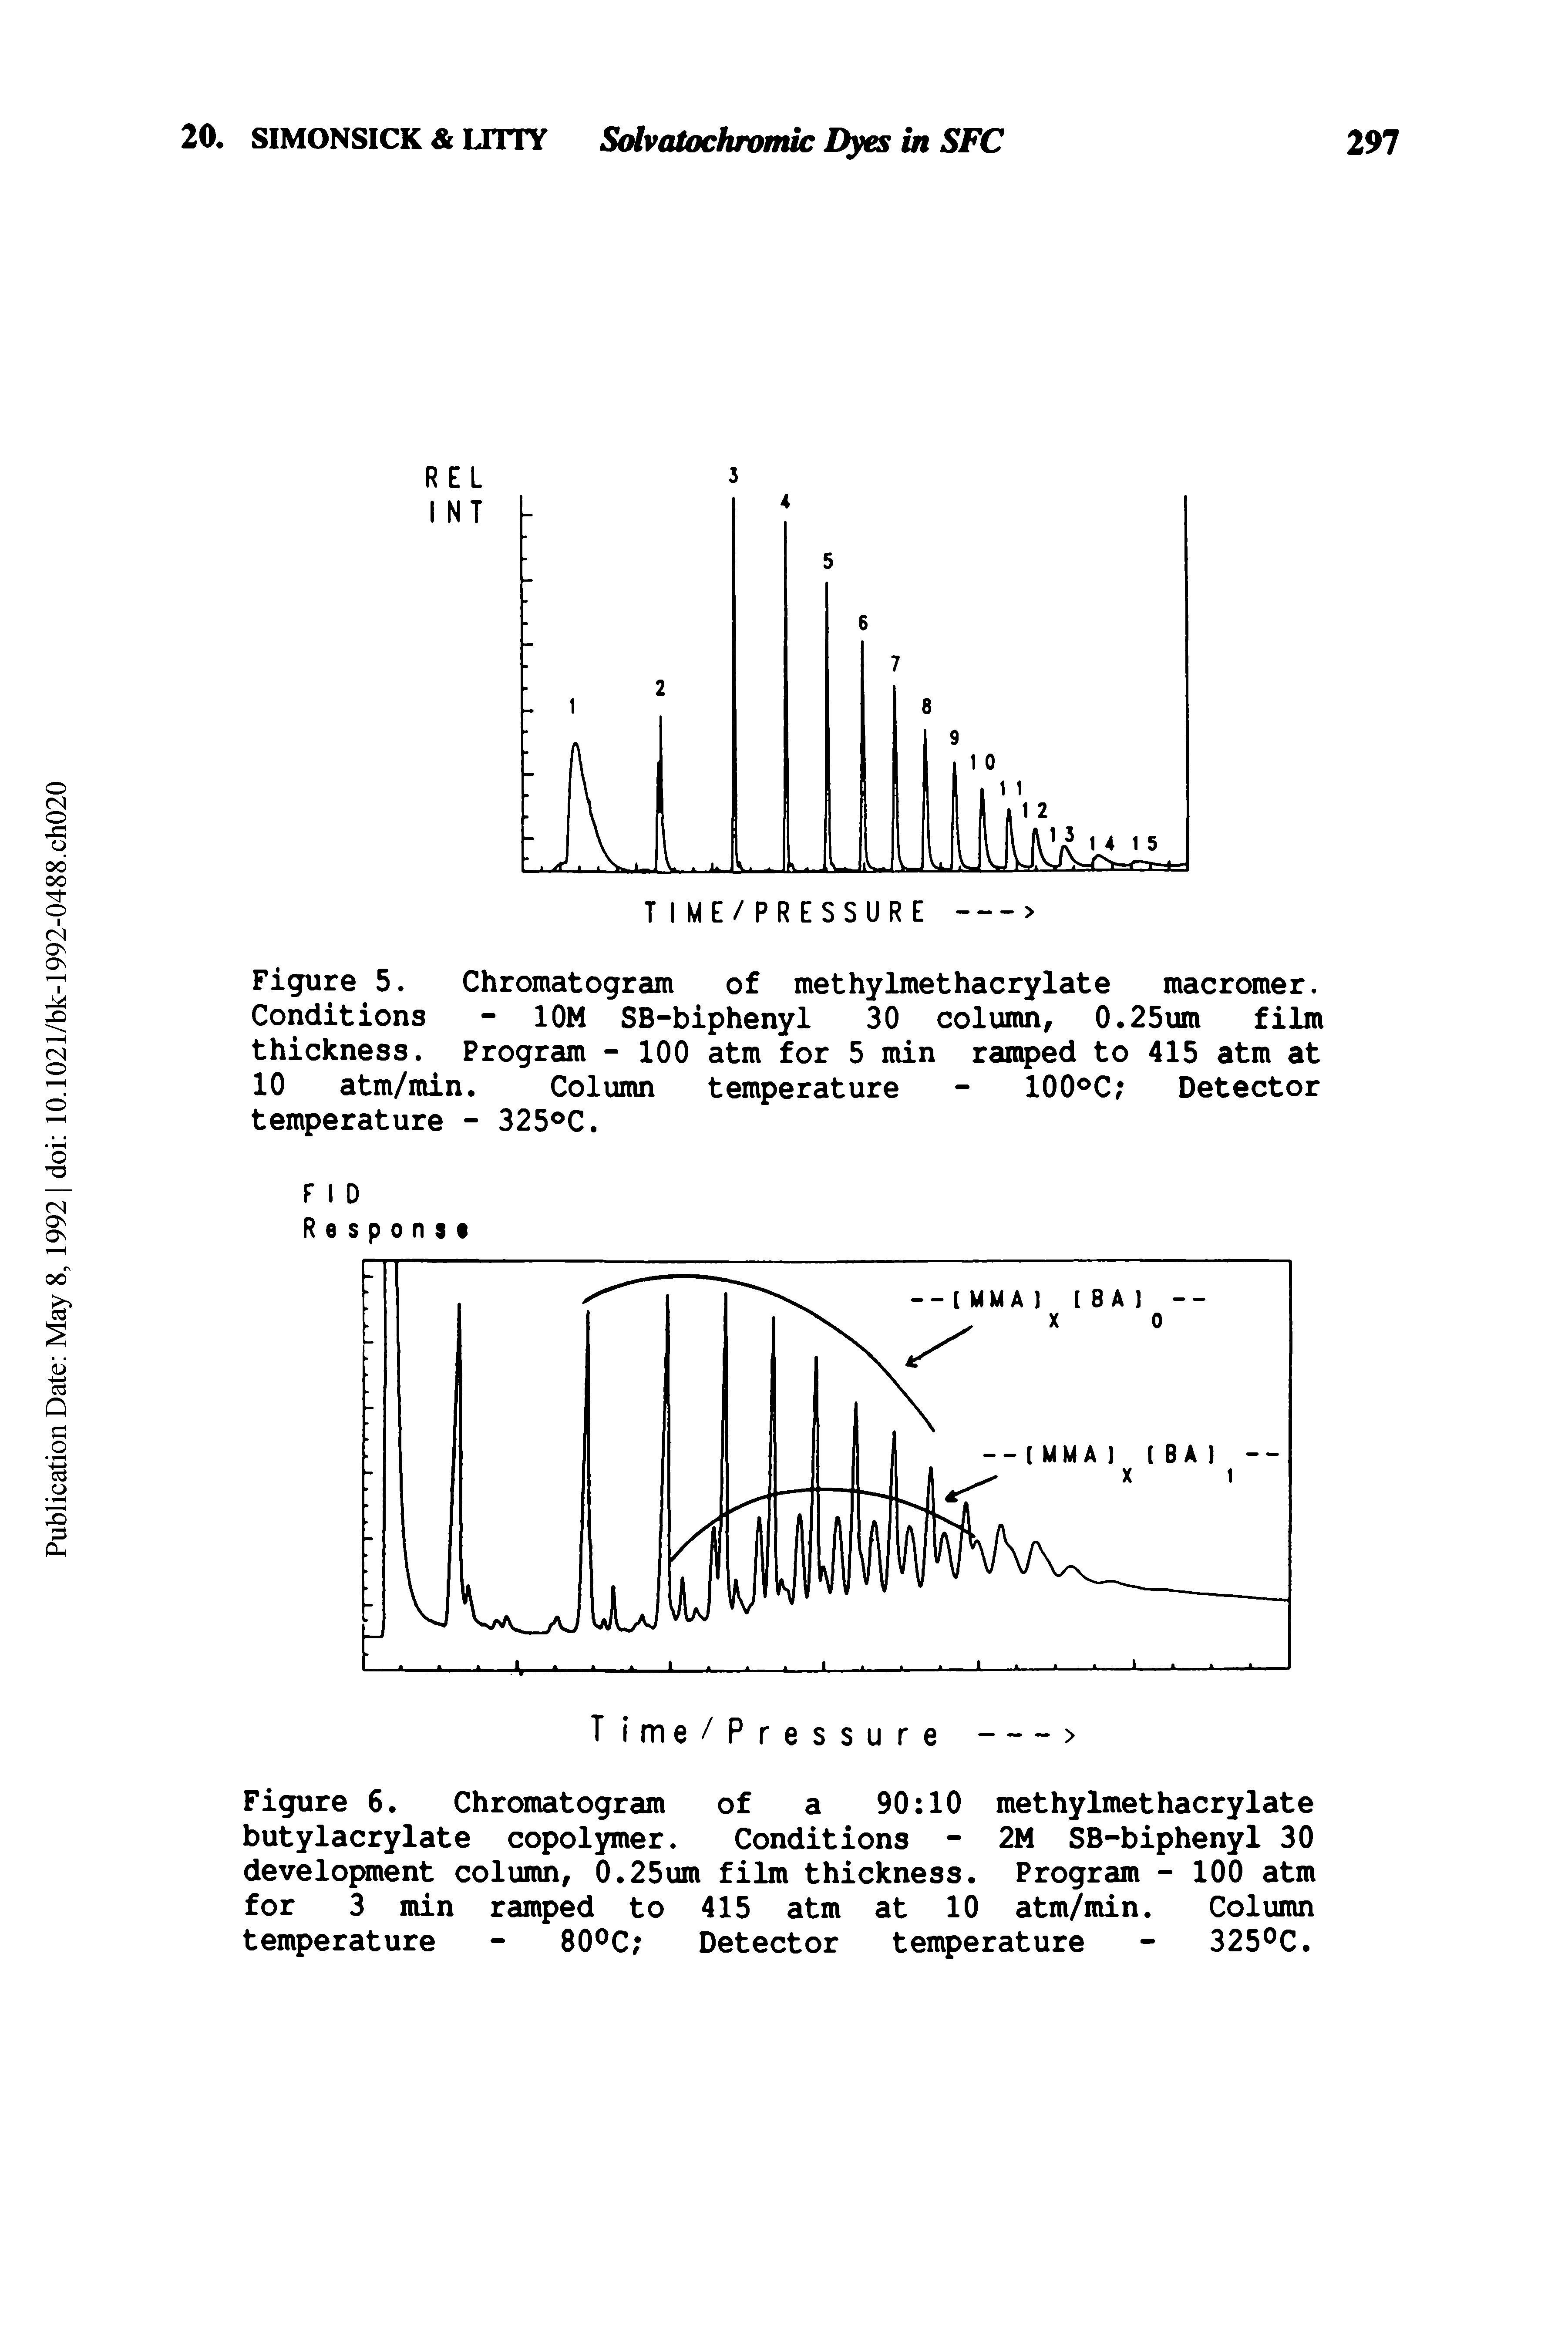 Figure 6. Chromatogram of a 90 10 methylmethacrylate butylacrylate copolymer. Conditions - 2M SB-biphenyl 30 development column, 0.25um film thickness. Program - 100 atm for 3 min ramped to 415 atm at 10 atm/min. Column temperature - 80°C Detector temperature - 325°C.